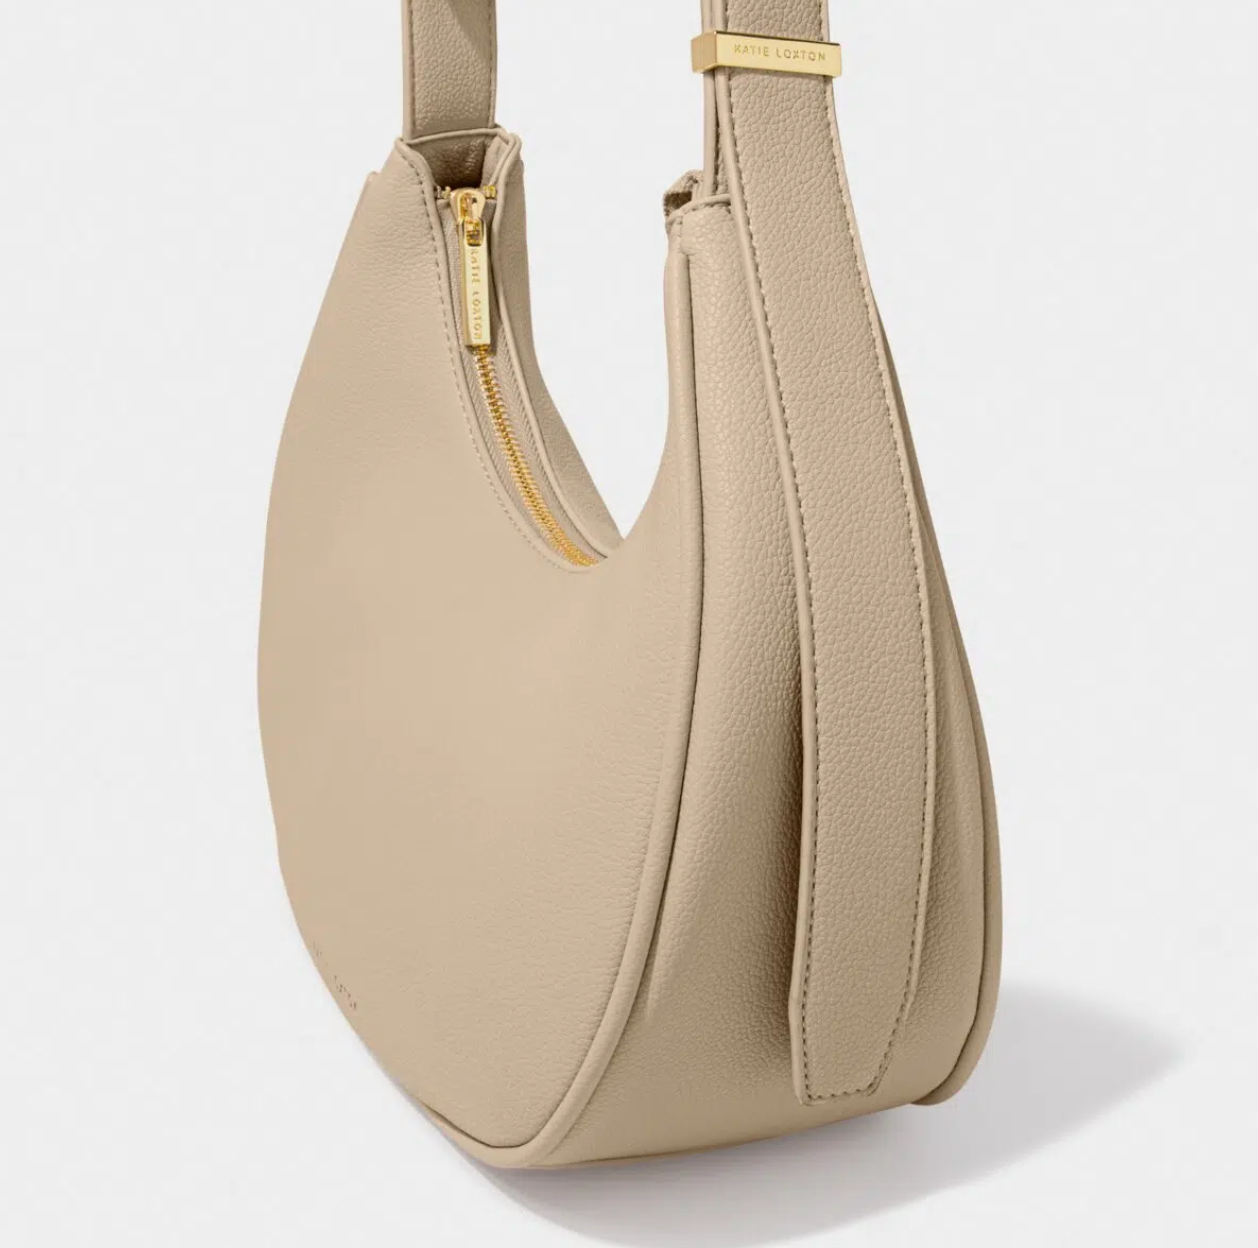 side view of the light taupe scoop handbag showing the gold zip and gold strap hardware, which both say Katie Loxton. The bag sits against a white background